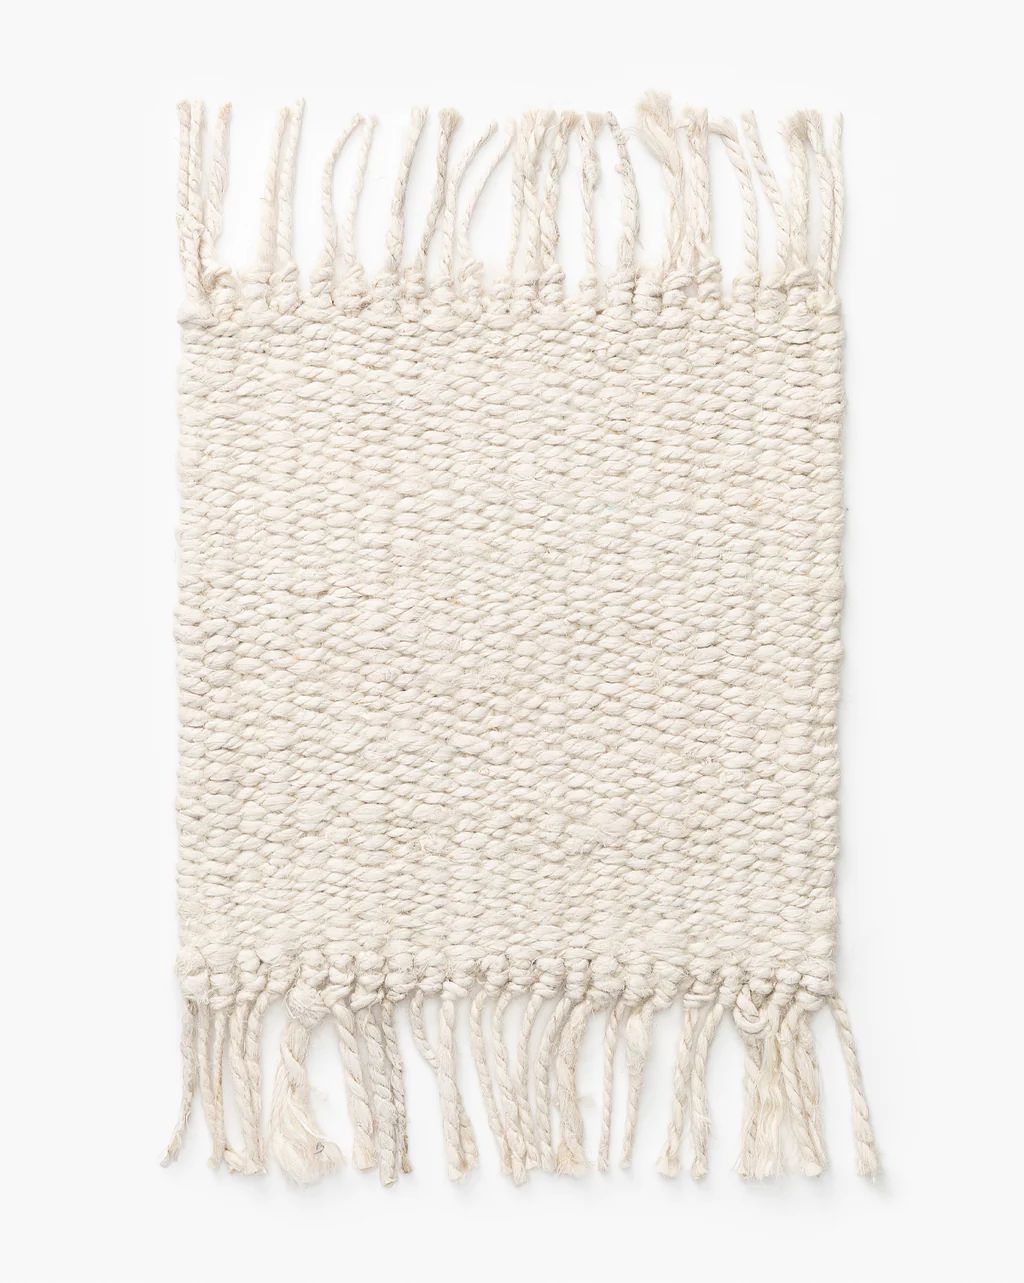 Kit Jute Handwoven Rug Swatch | McGee & Co.